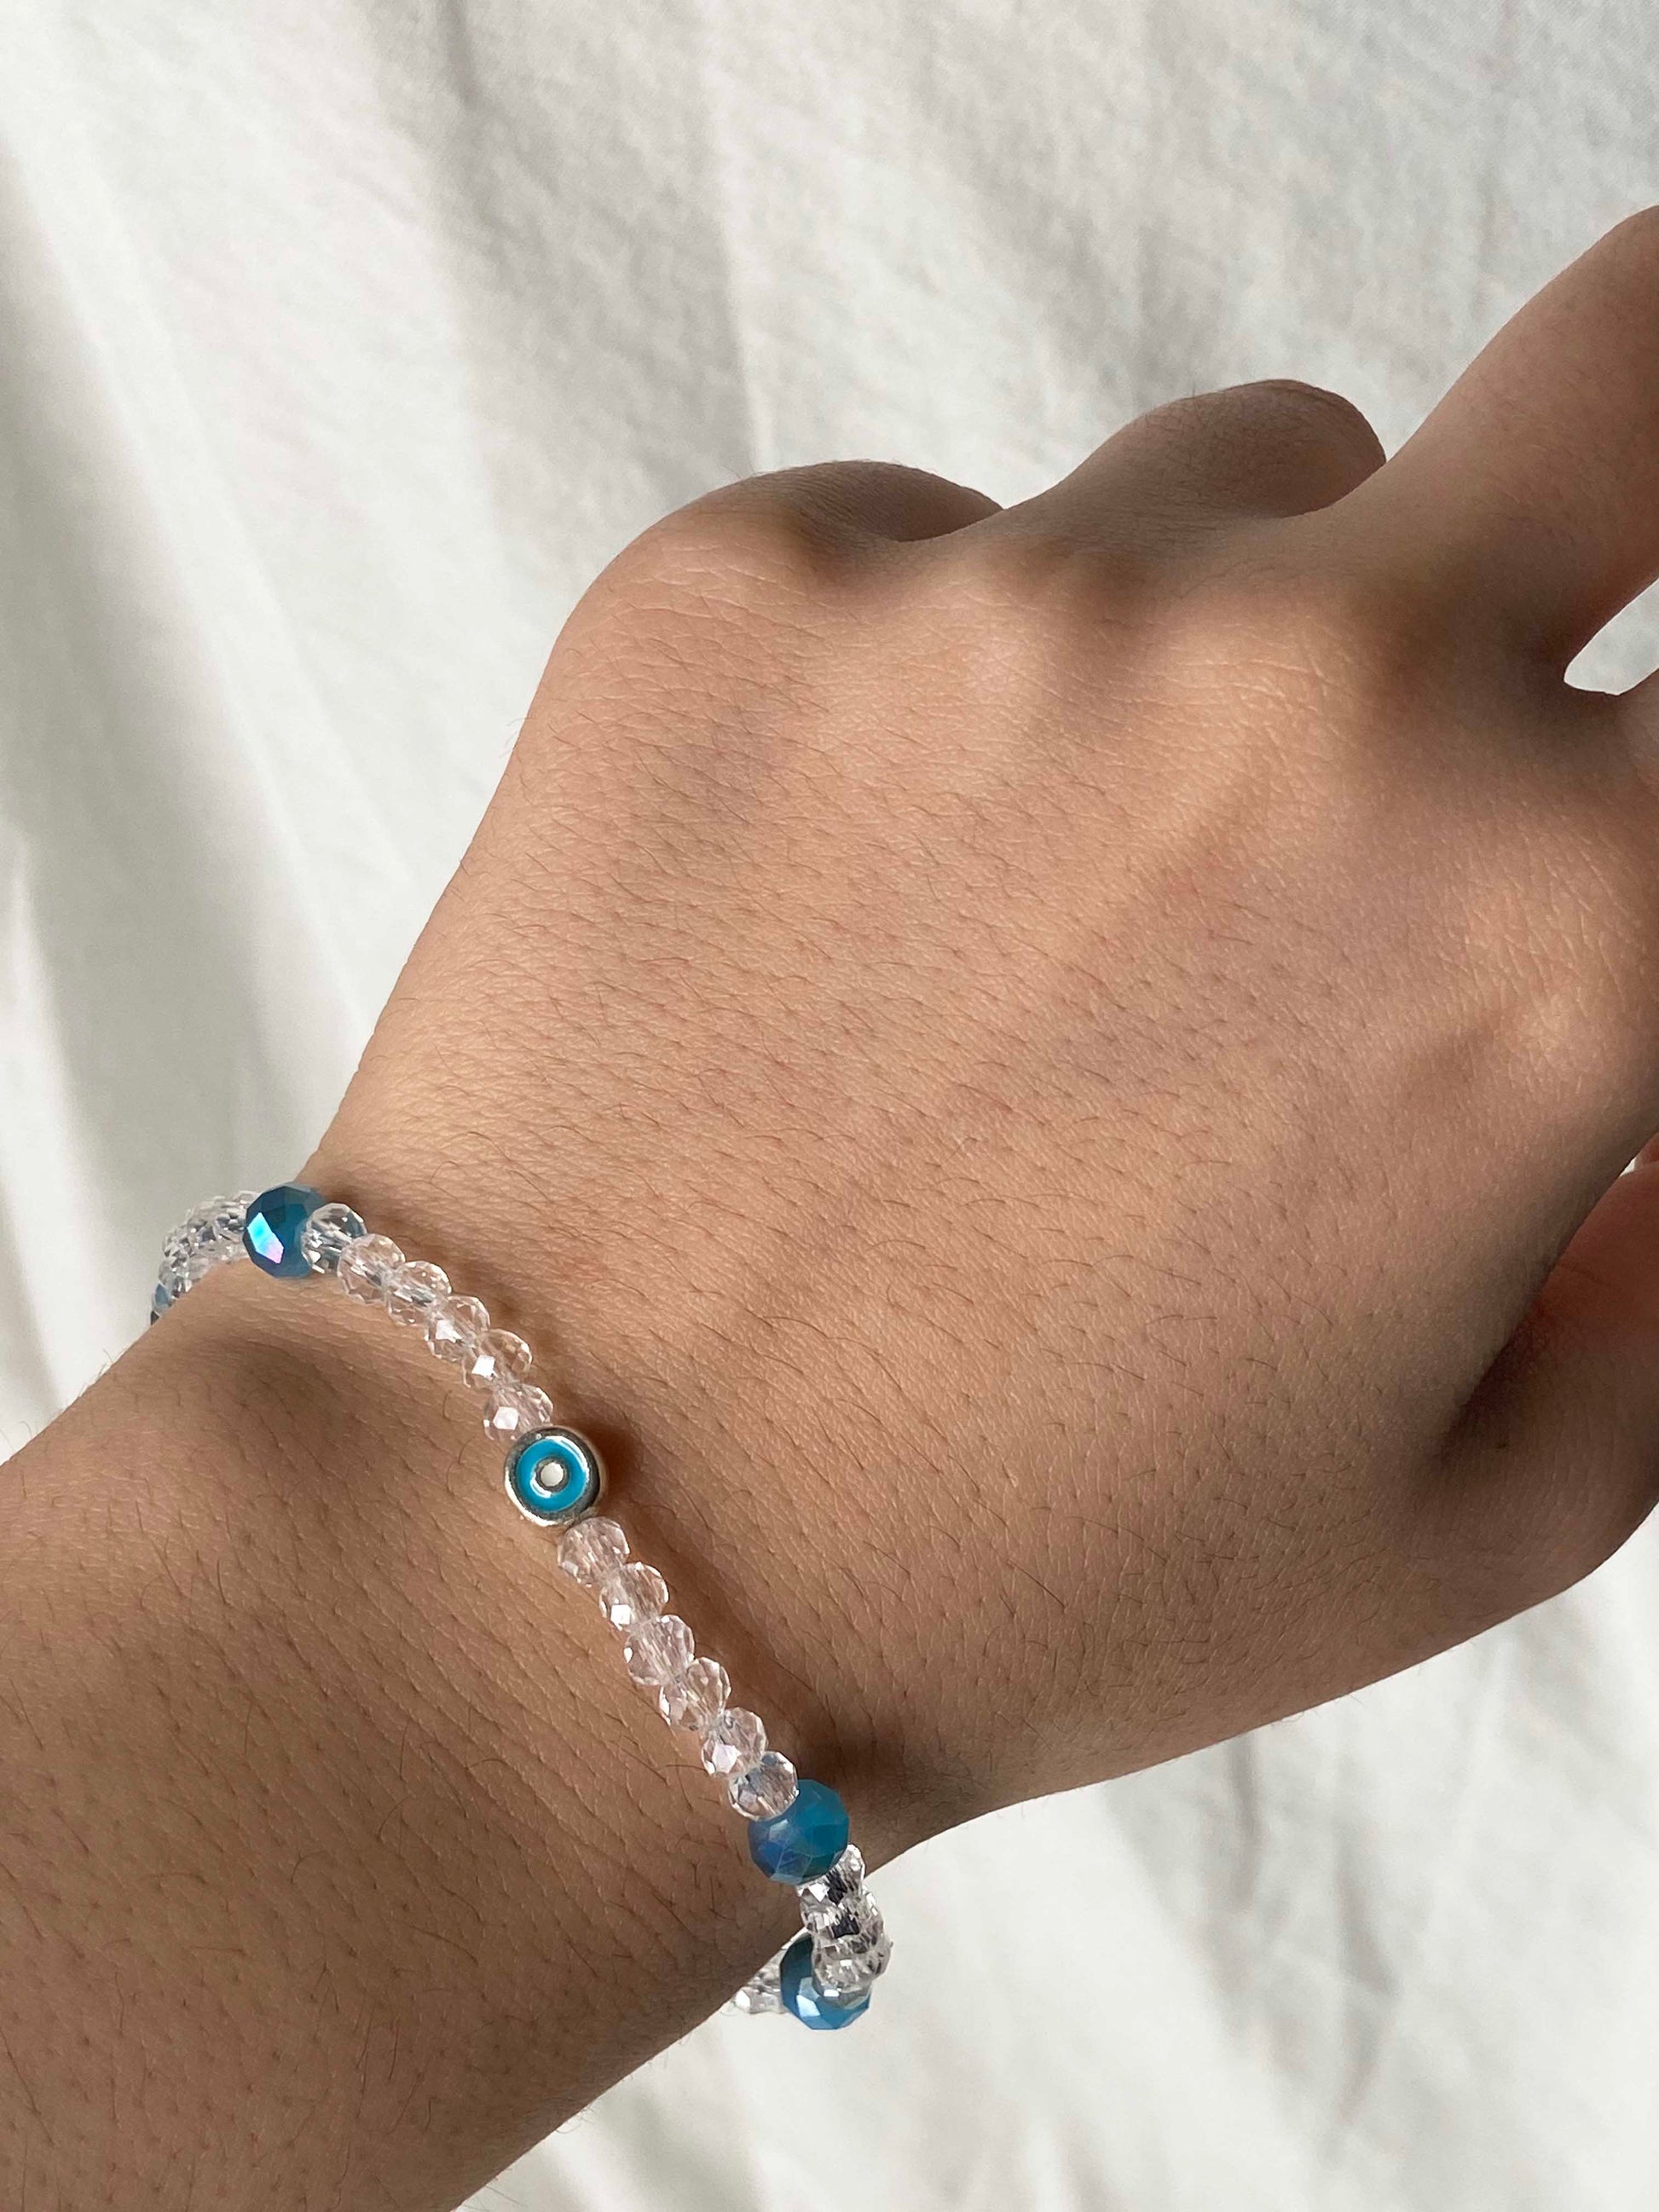 Handmade clear and blue crystal beaded bracelet with a silver backed blue evil eye charm.